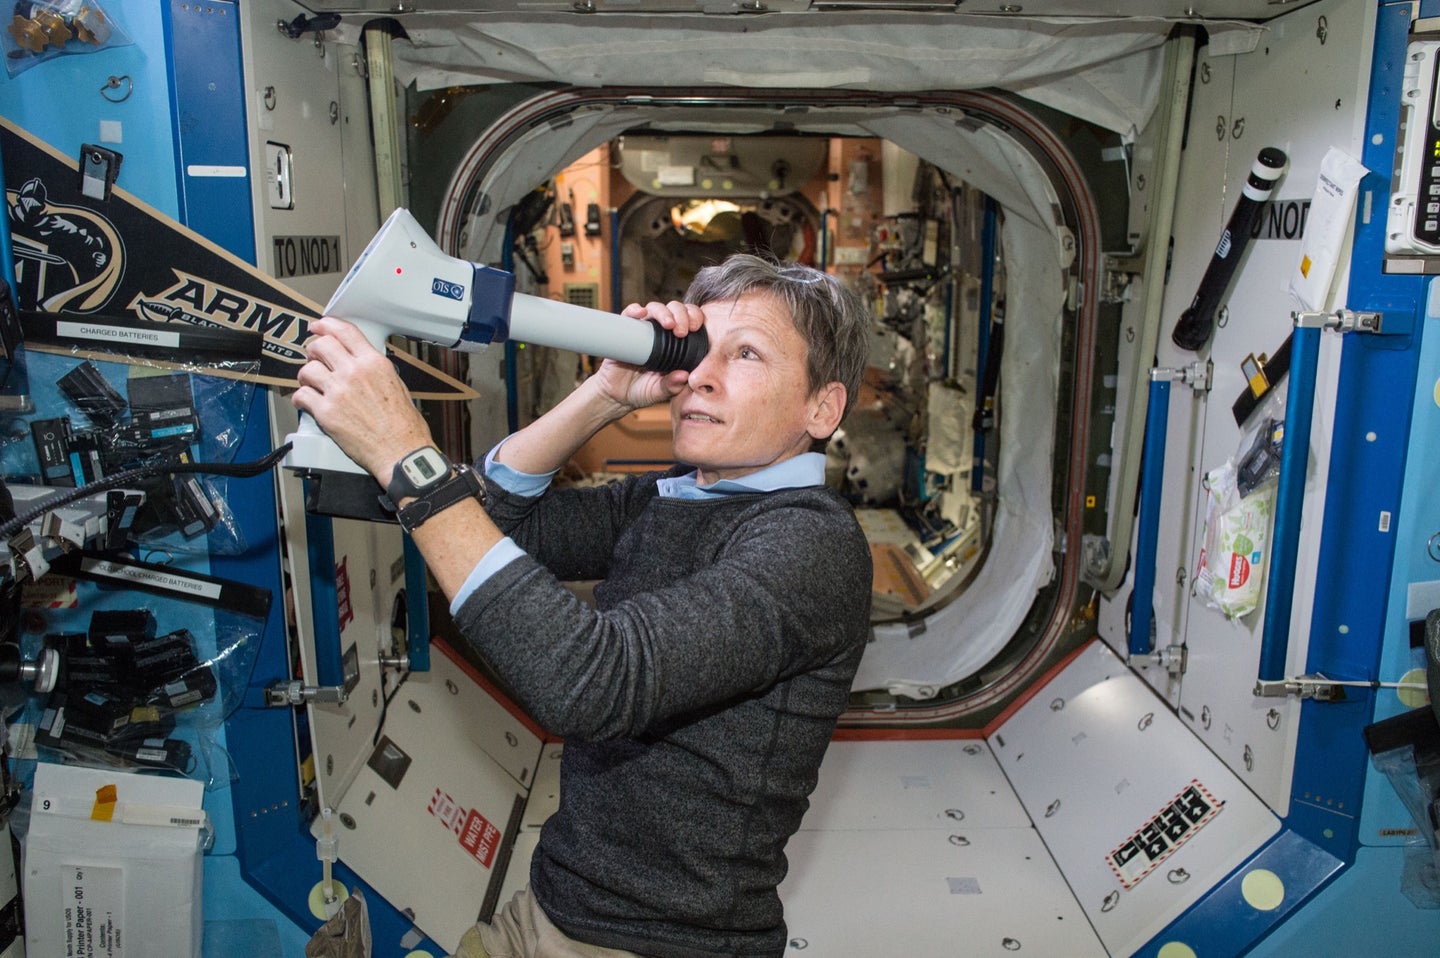 a woman astronaut with short hair and glasses propped on her head looks through a long tube with a lens and camera which takes pictures of her eye. she's aboard the international space station